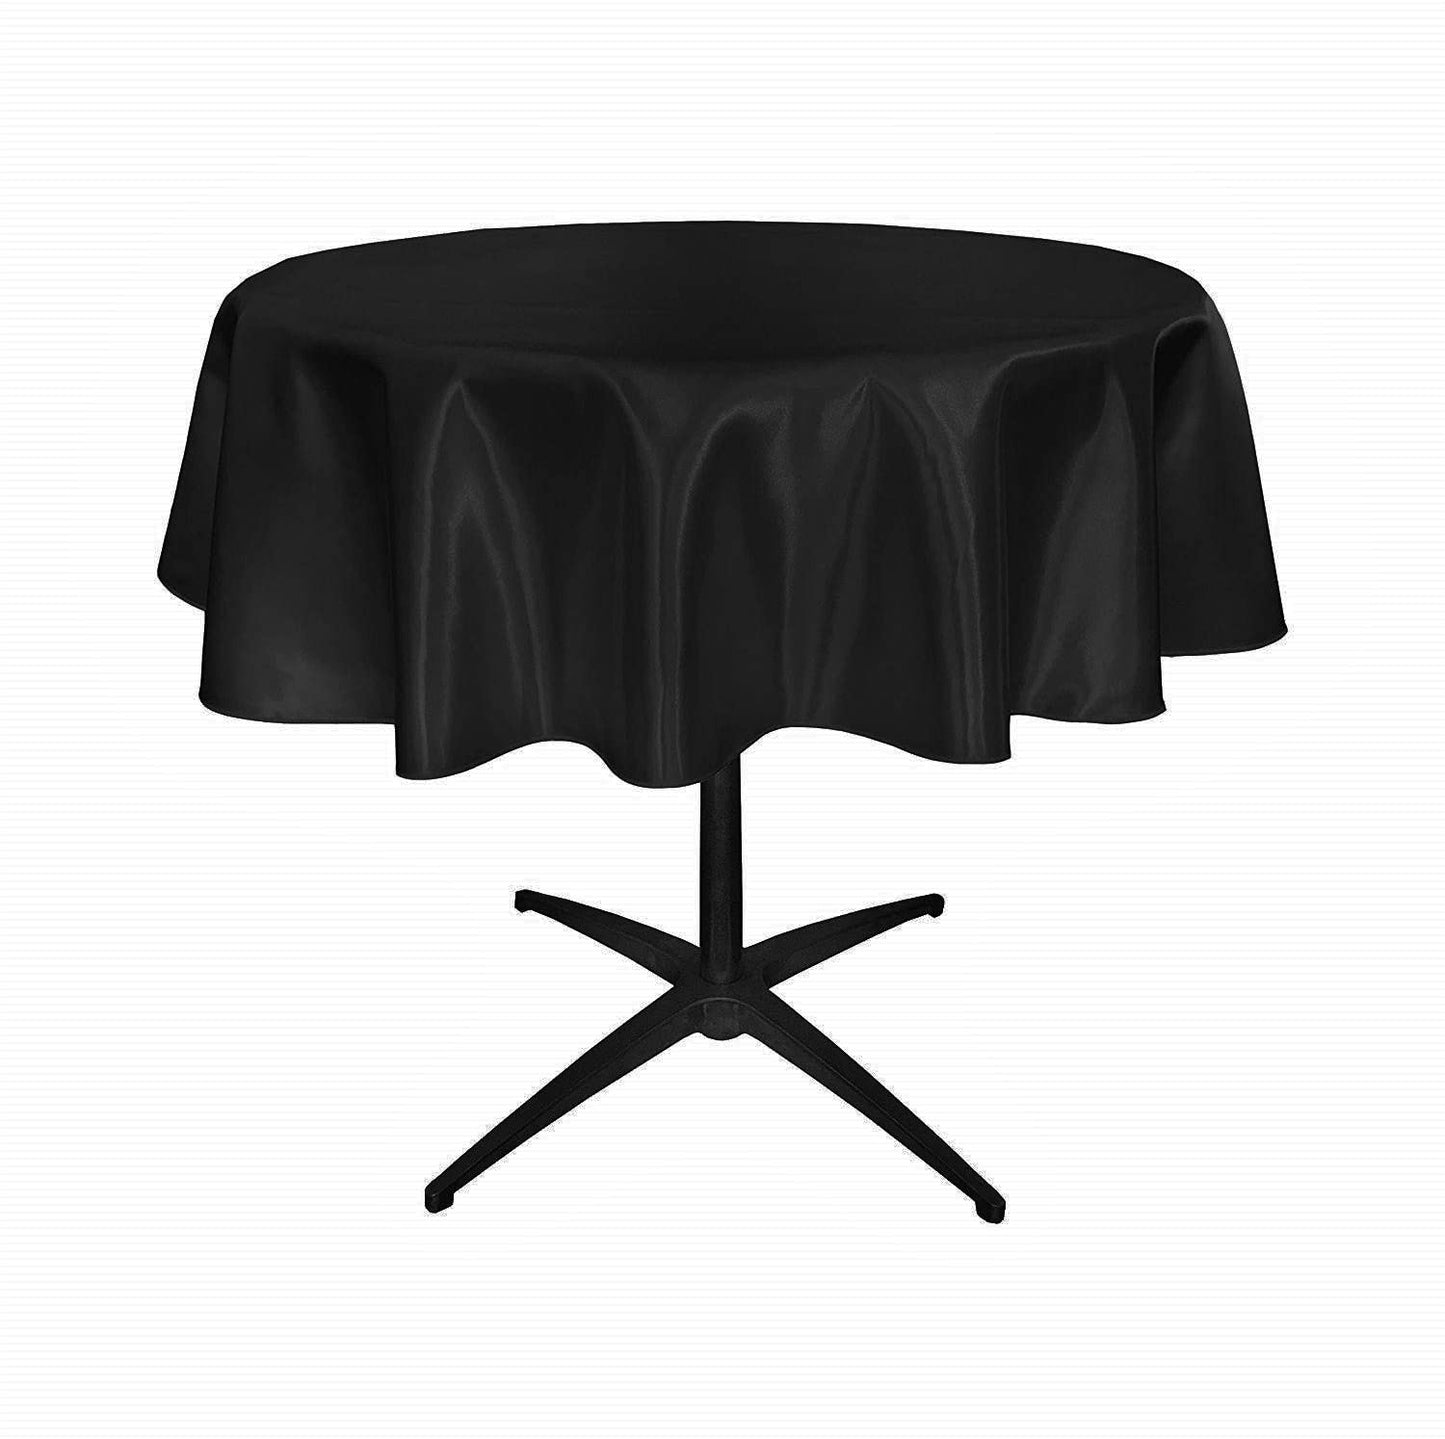 Bridal Satin Table Overlay, for Small Coffee Table (Black,